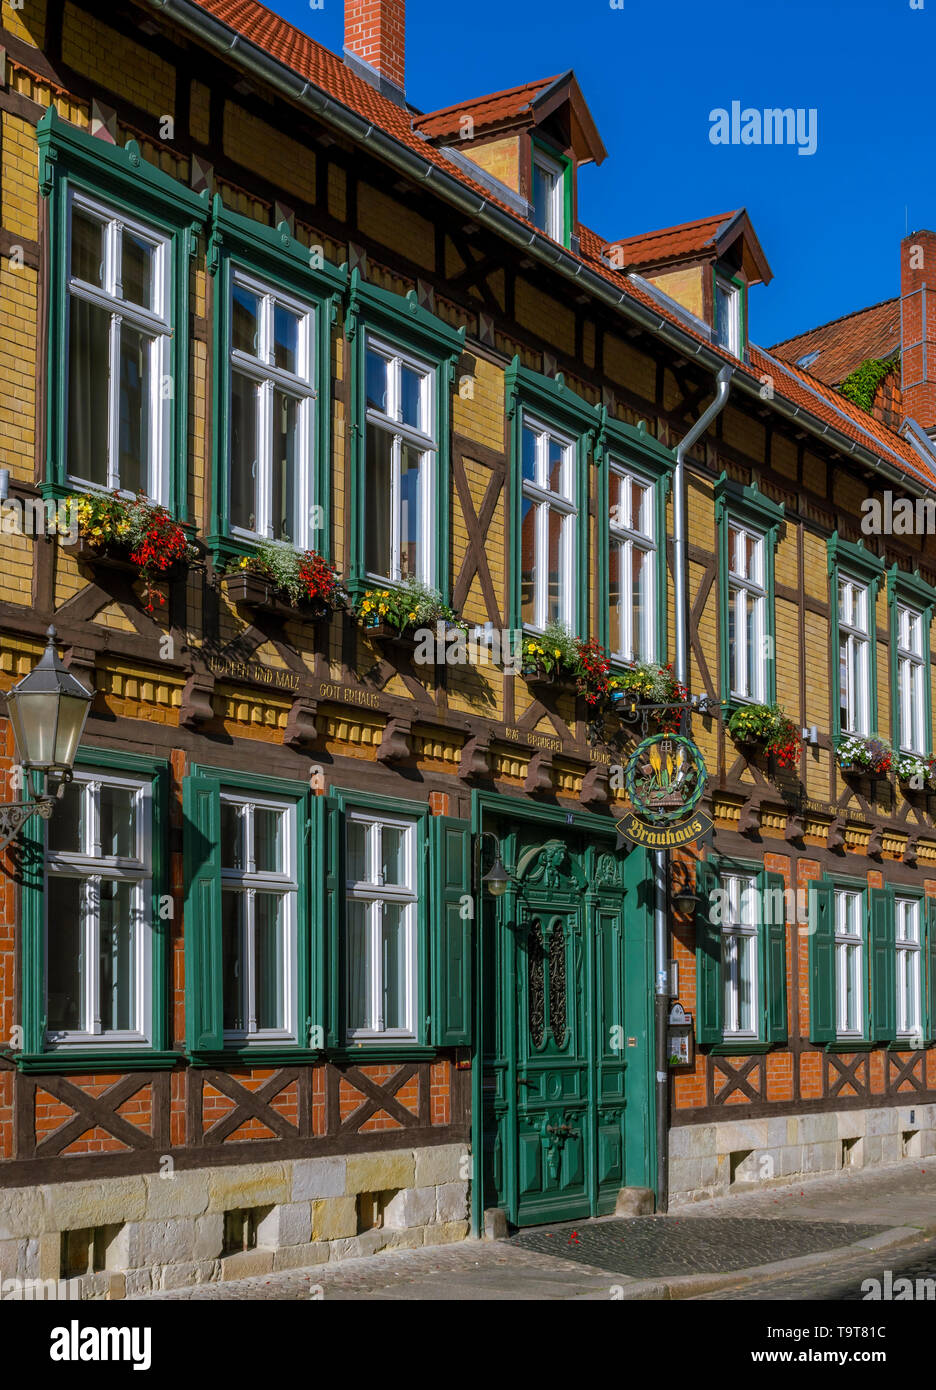 Brewery historical half-timbered house in the Old Town of Quedlinburg, UNESCO world heritage, resin, Saxony-Anhalt, Germany, Europe, Brauhaus Historis Stock Photo